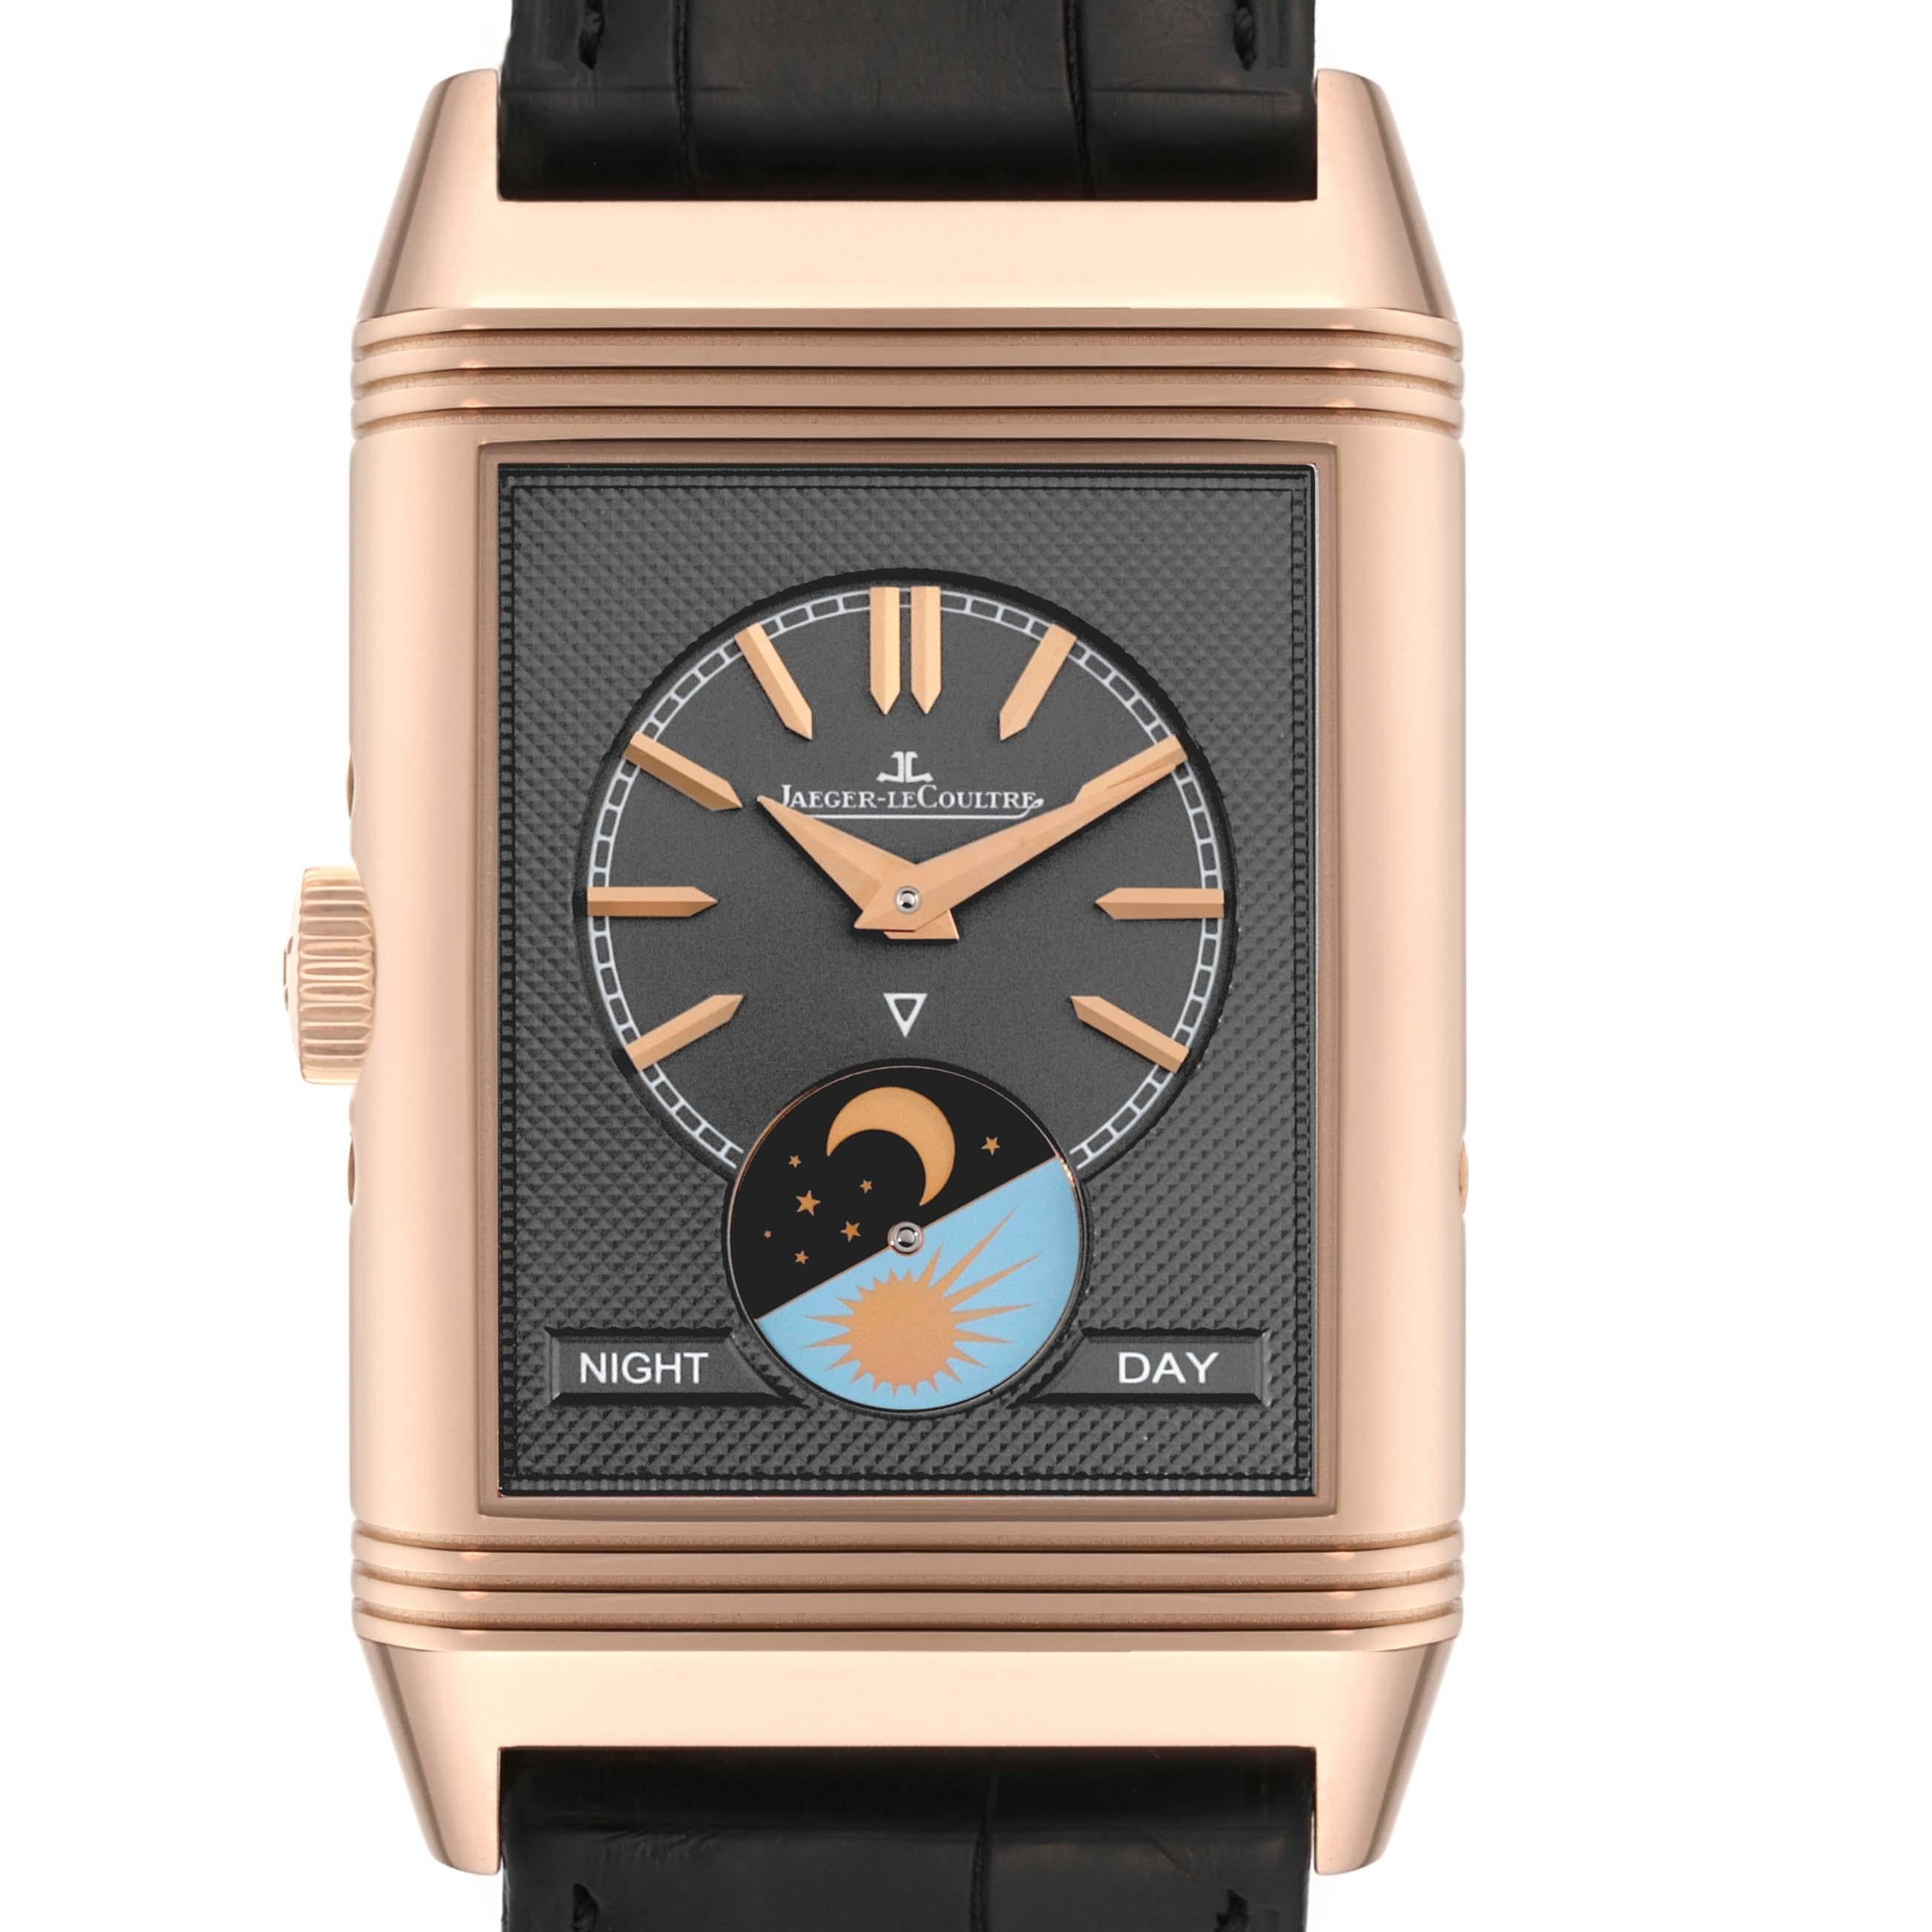 Jaeger LeCoultre Reverso Tribute Duoface Rose Gold Mens Watch 216.2.D3 Q3912420 In Excellent Condition For Sale In Atlanta, GA